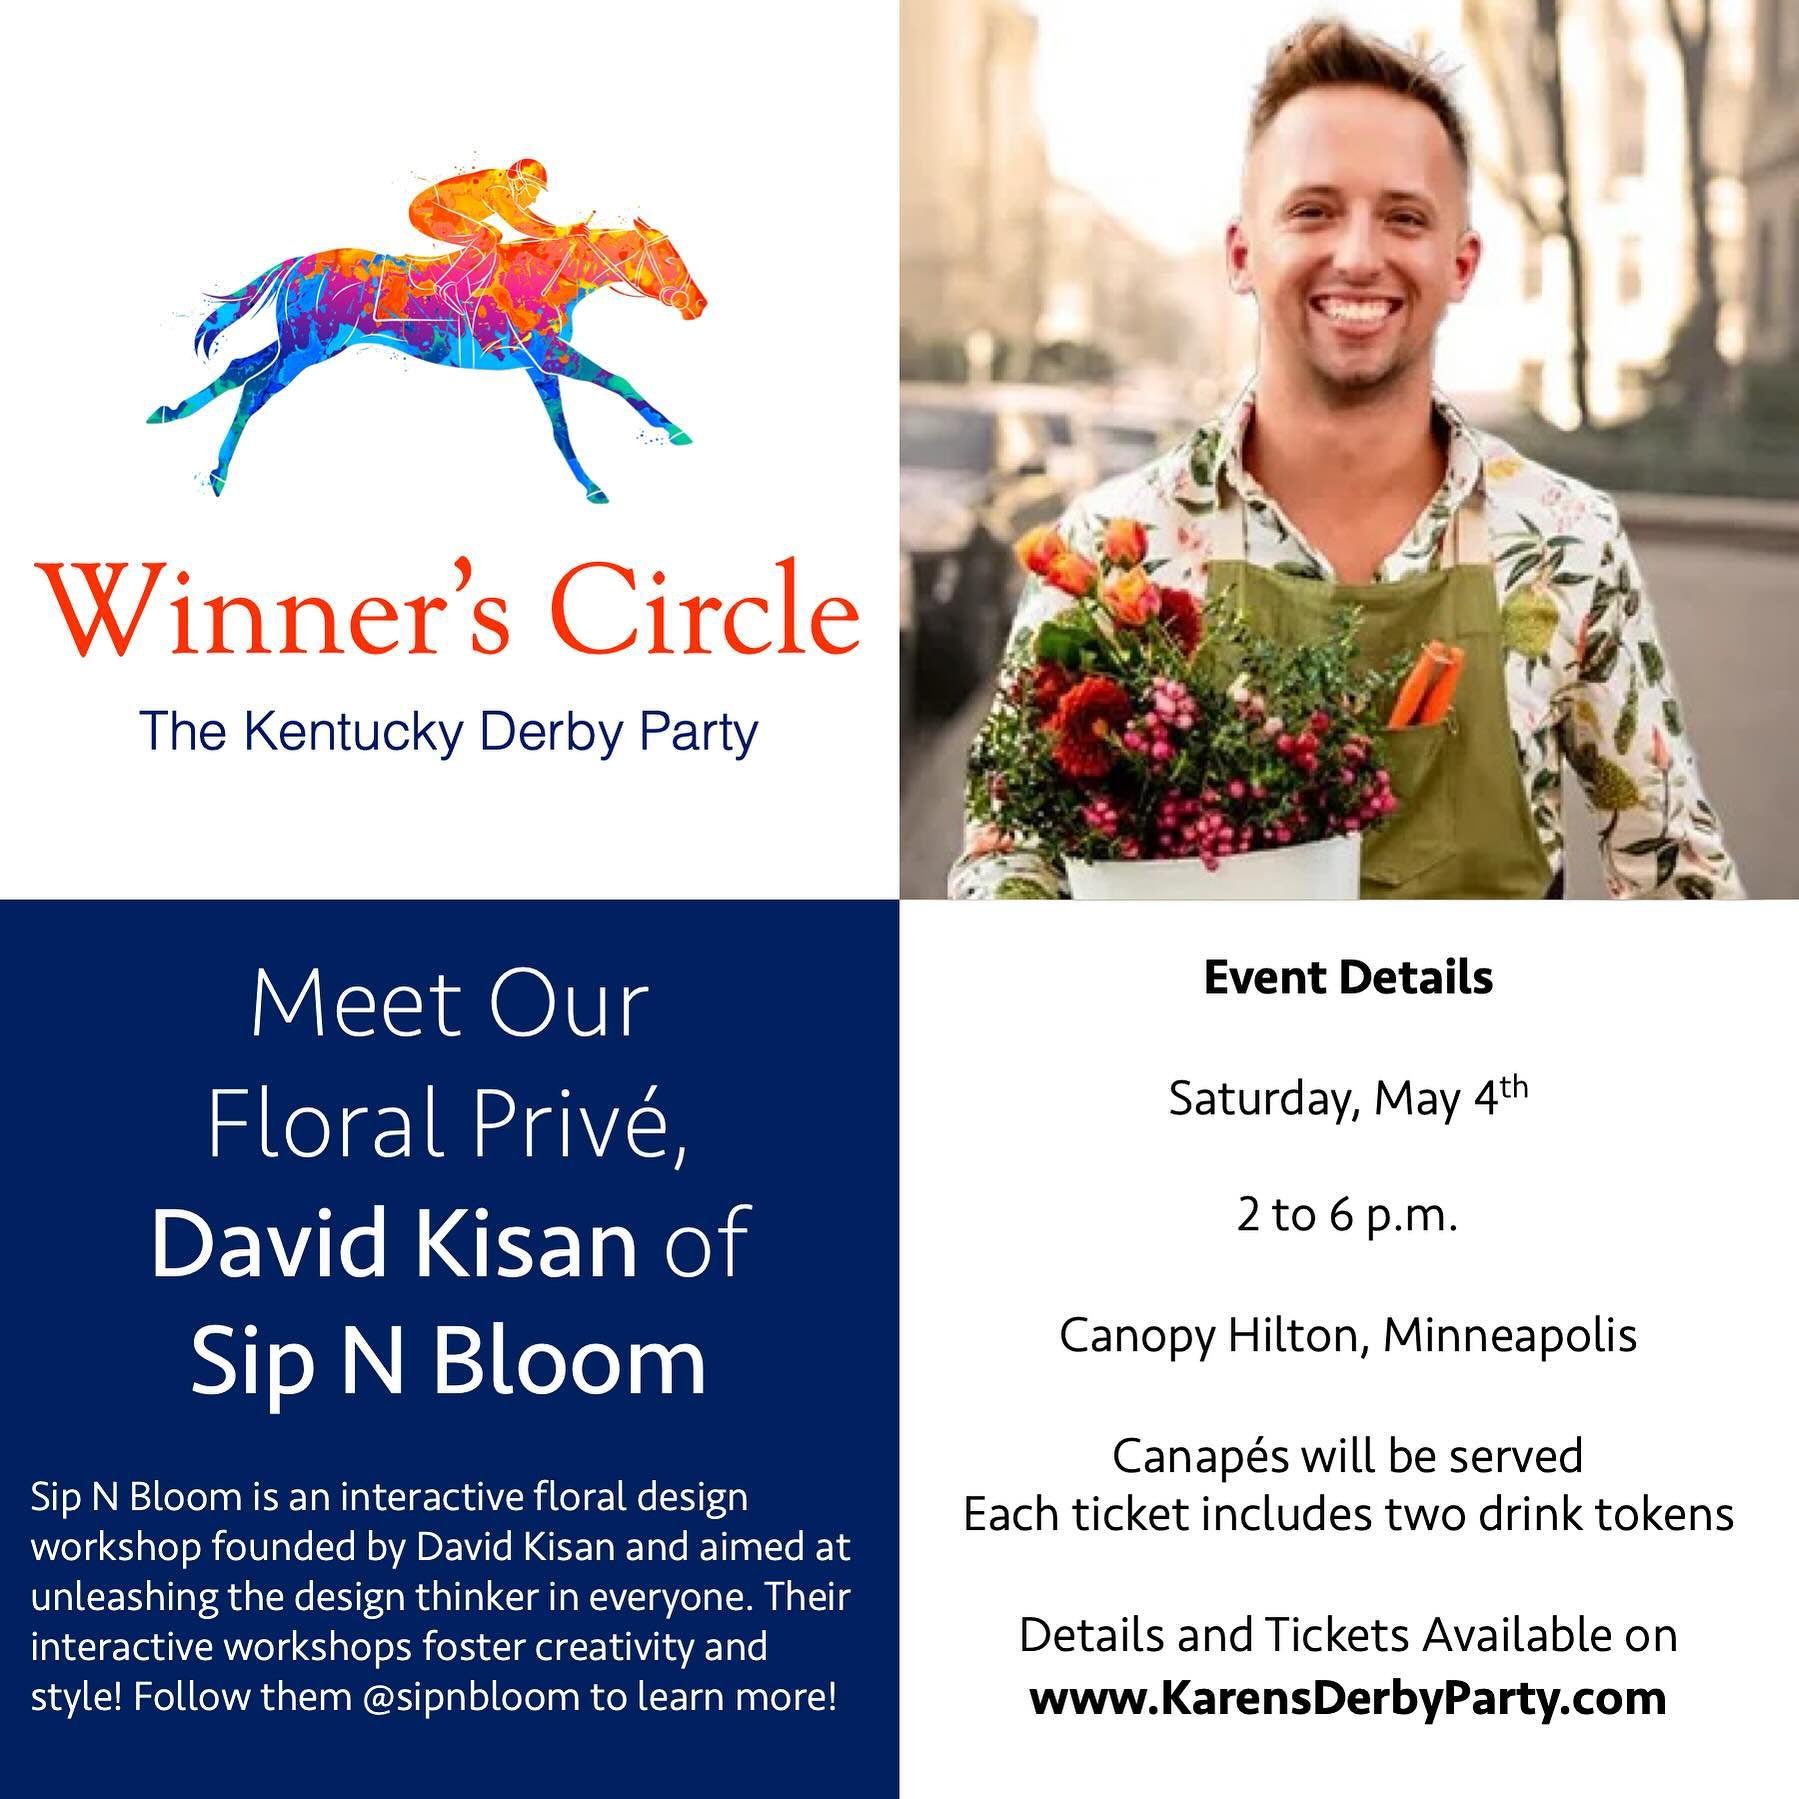 Tomorrow is the day.  David from @sipnbloom is our sweetheart in the team.  He is going to give us a surprise with his talents and flowers tomorrow.
.
.
.
#kmhats #karenmorrismillinery #kentuckyderby #derbyparty #derbyhats #winnerscircle #sipnbloom #